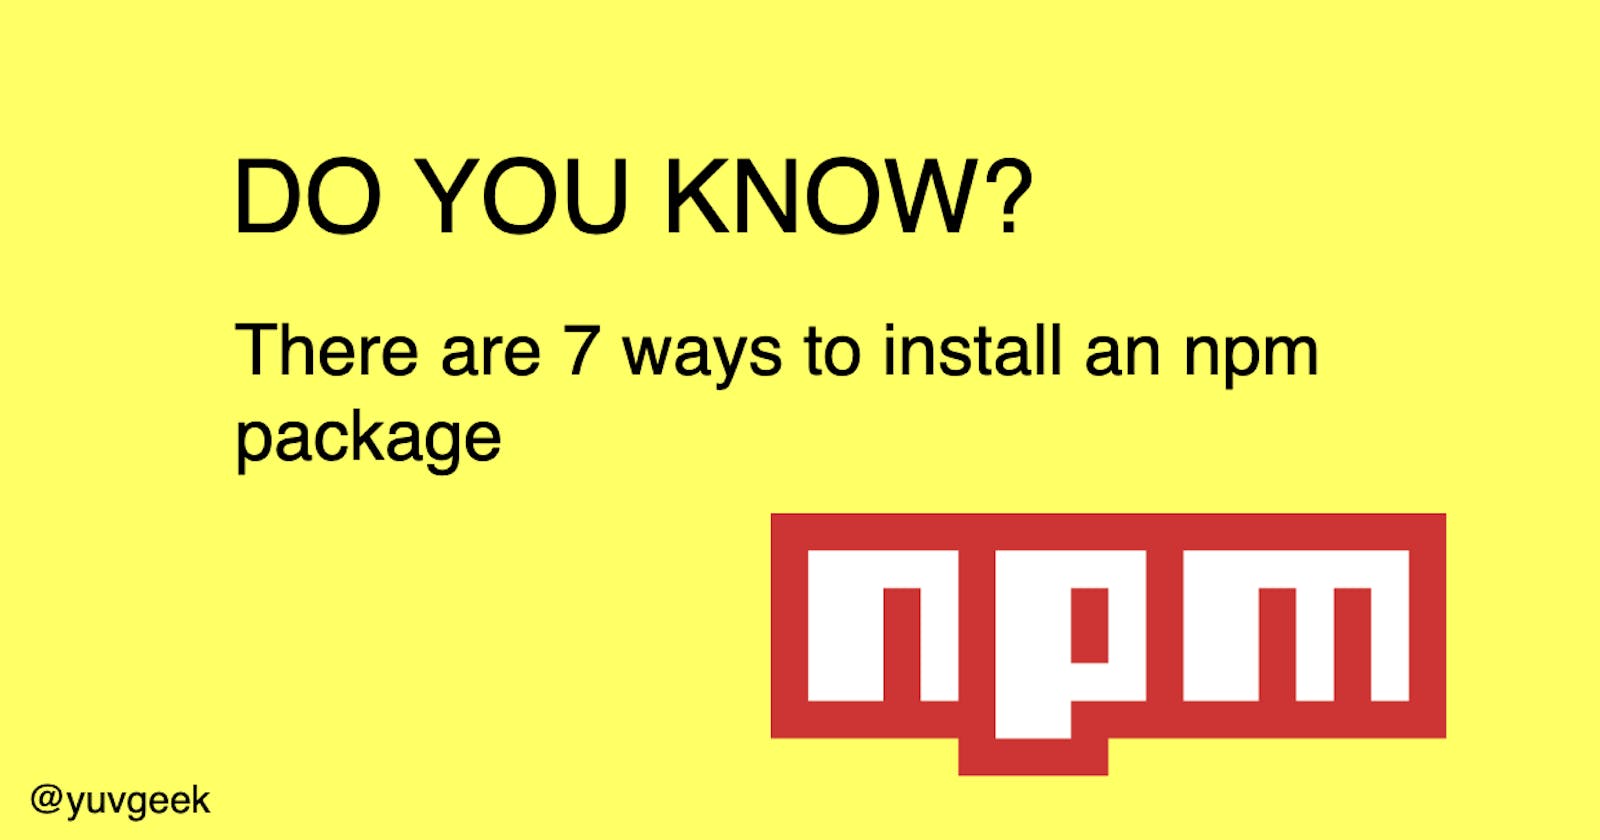 Do you know that there are 7 ways to install an npm package? I bet you don't know all.